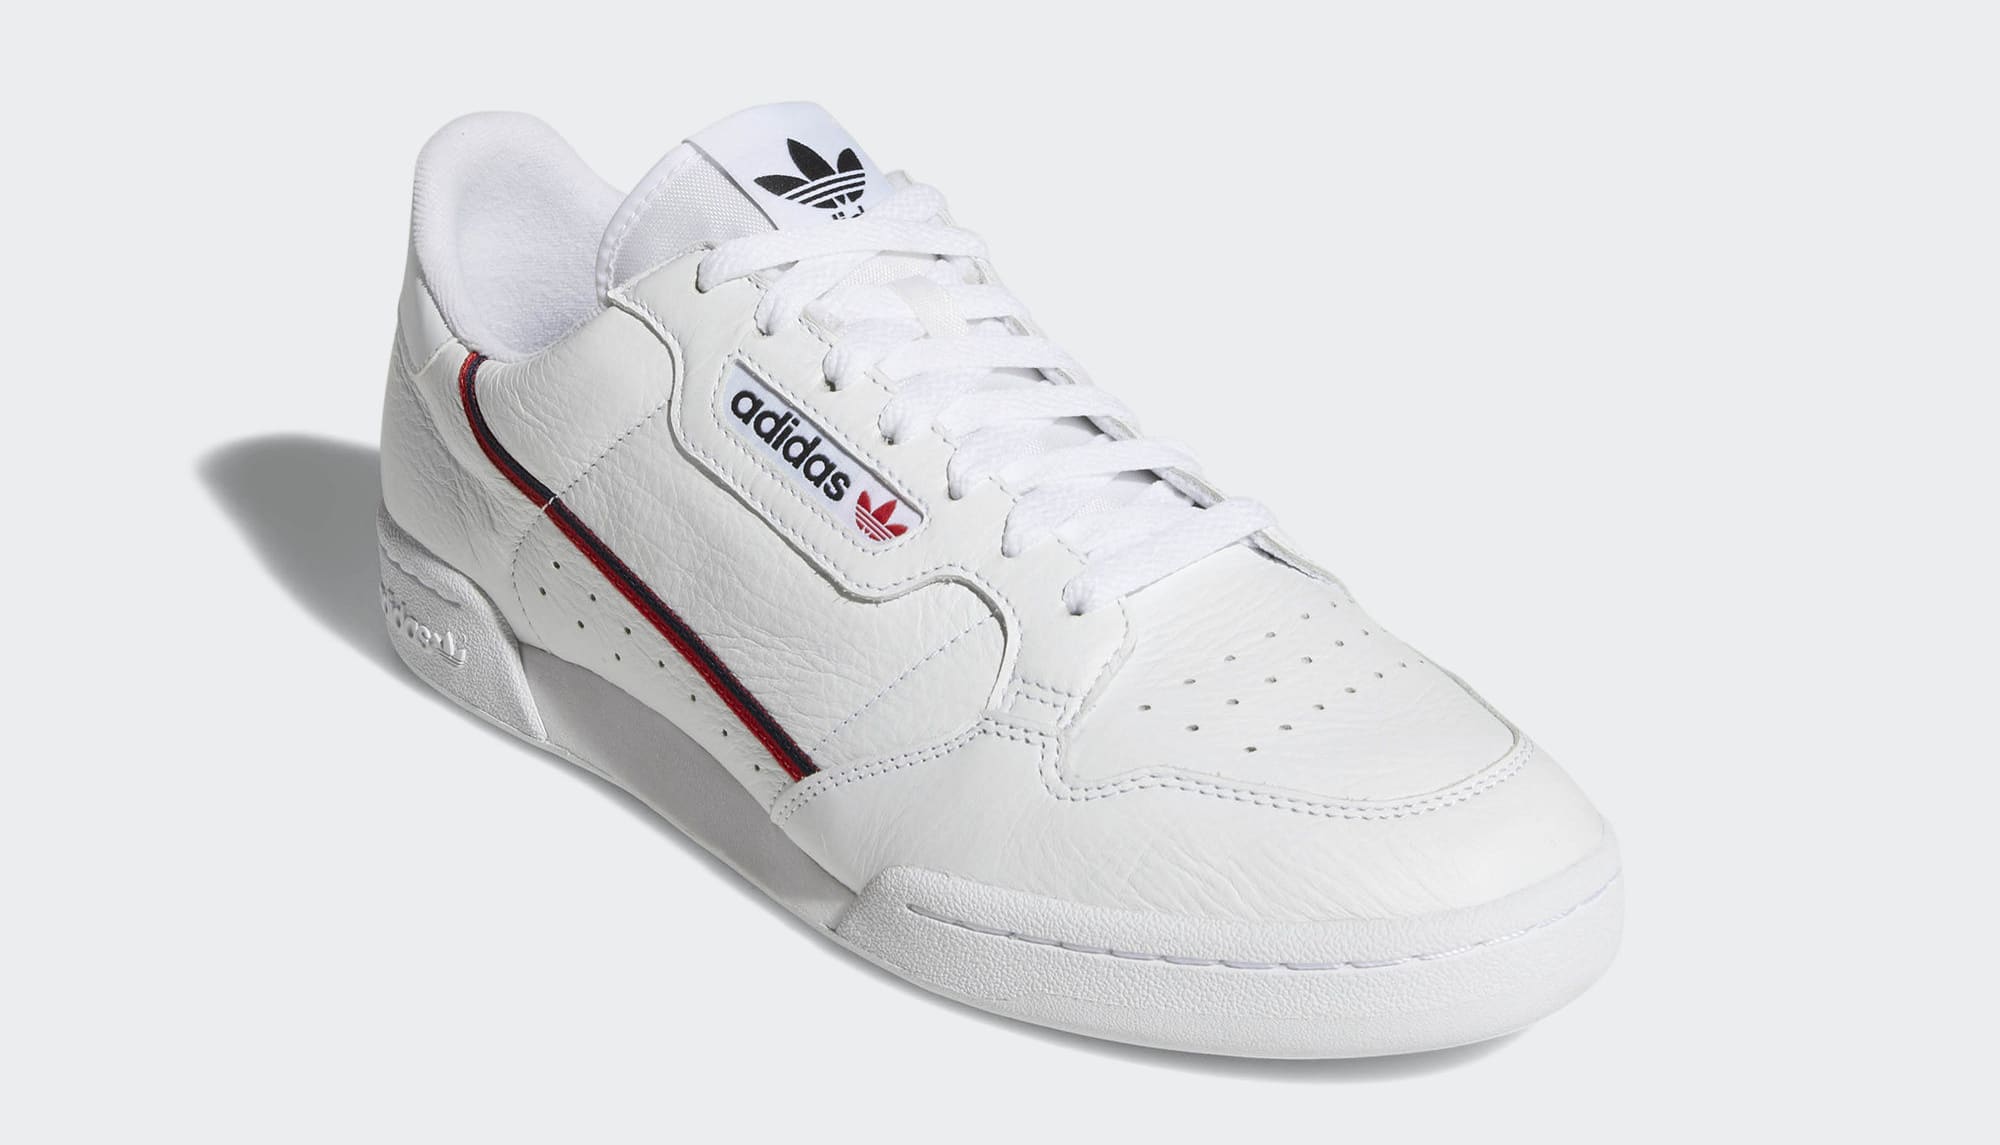 friction Product site Adidas Originals Continental 80 Rascal B41674 Release Date | Sole Collector